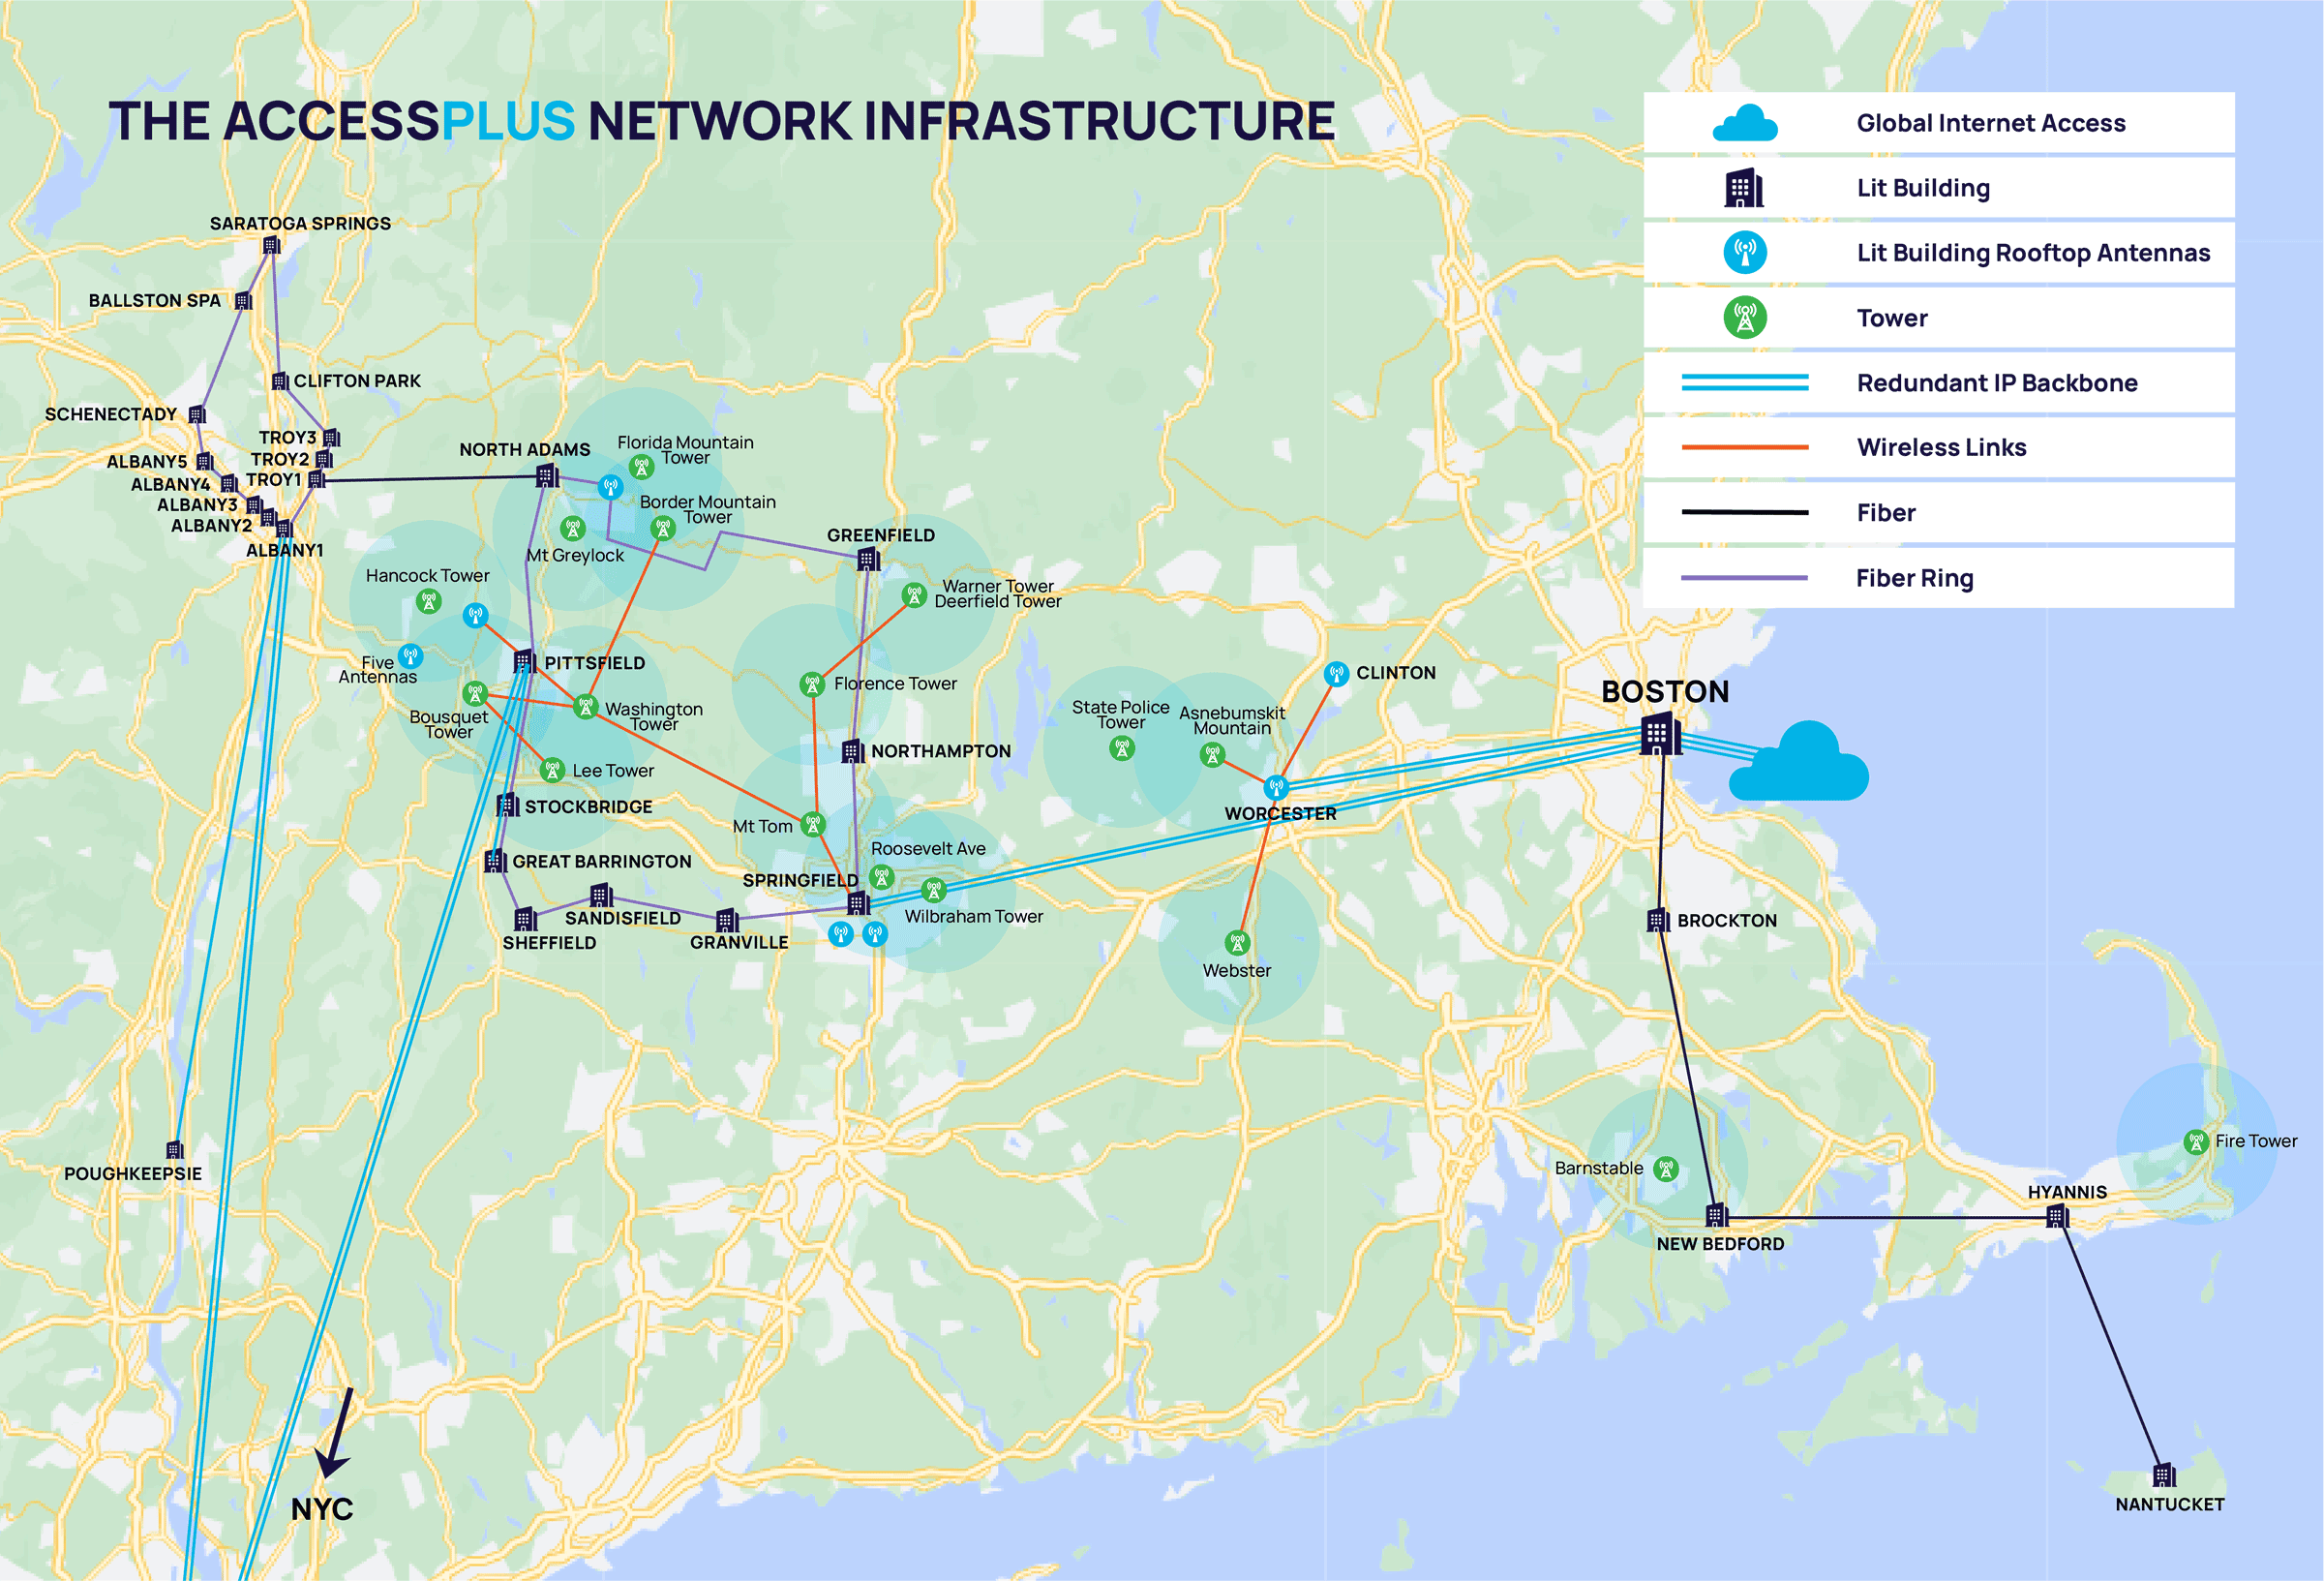 The AccessPlus Network Infrastructure